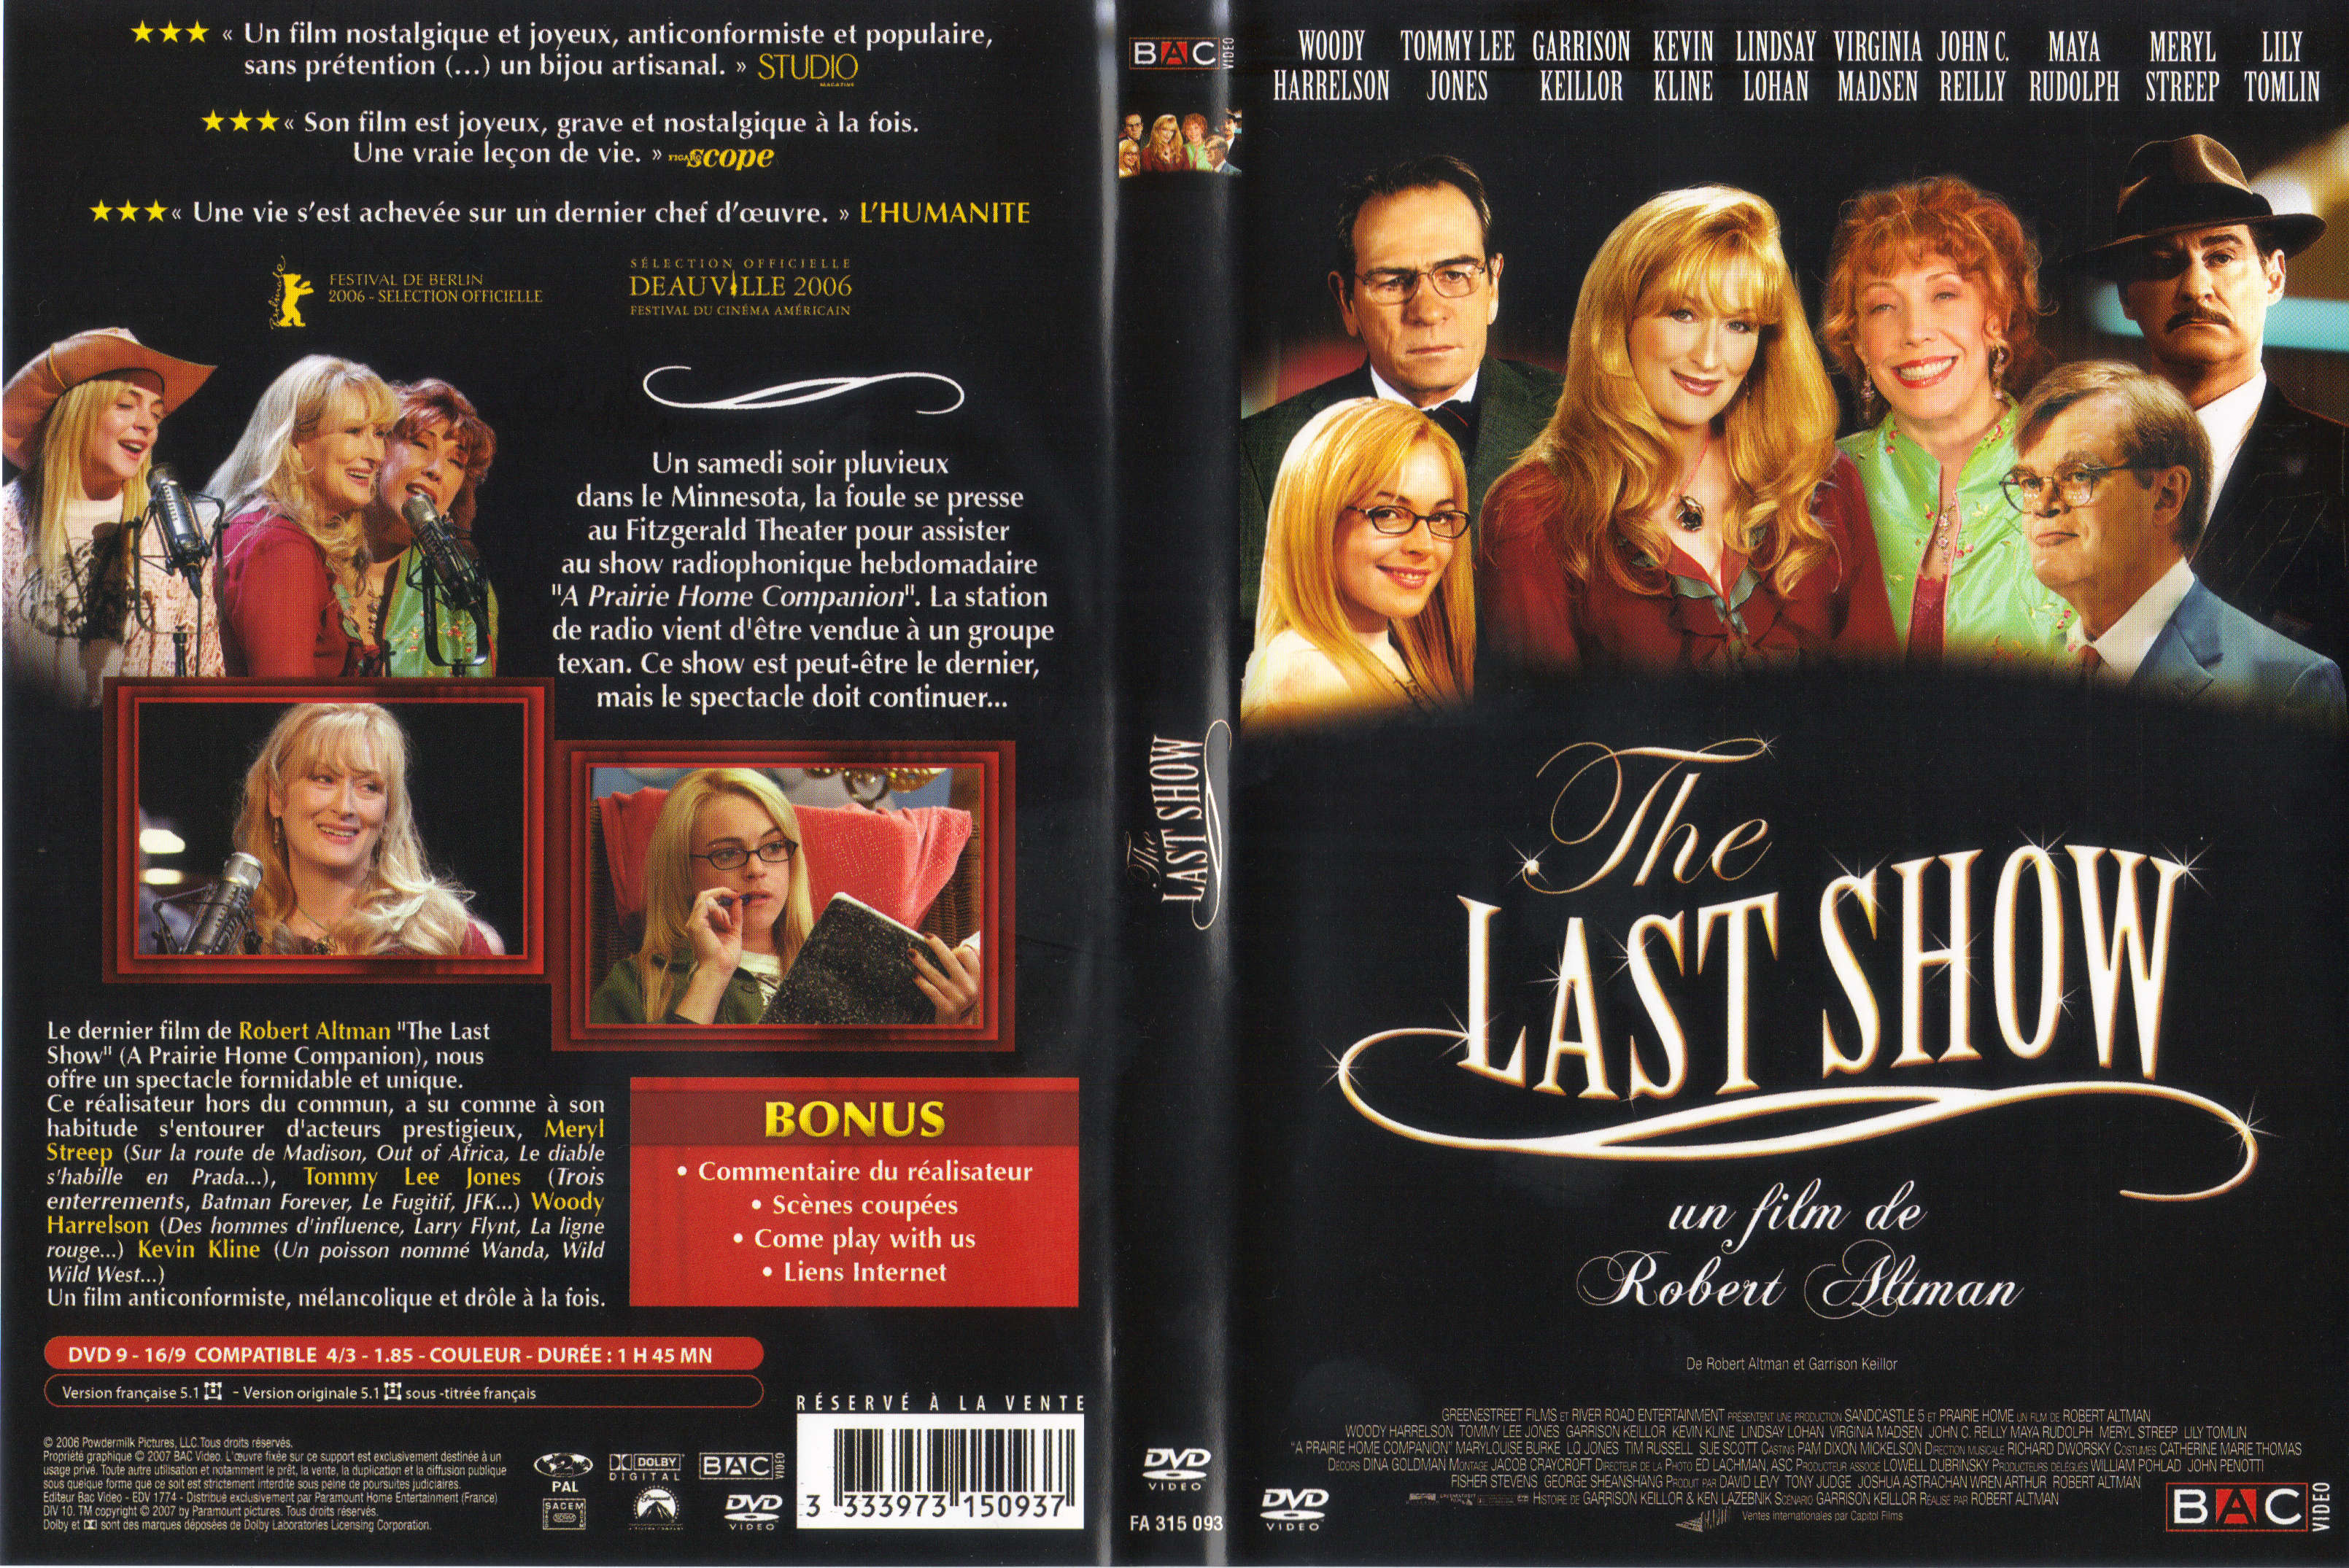 Jaquette DVD The Last Show v2